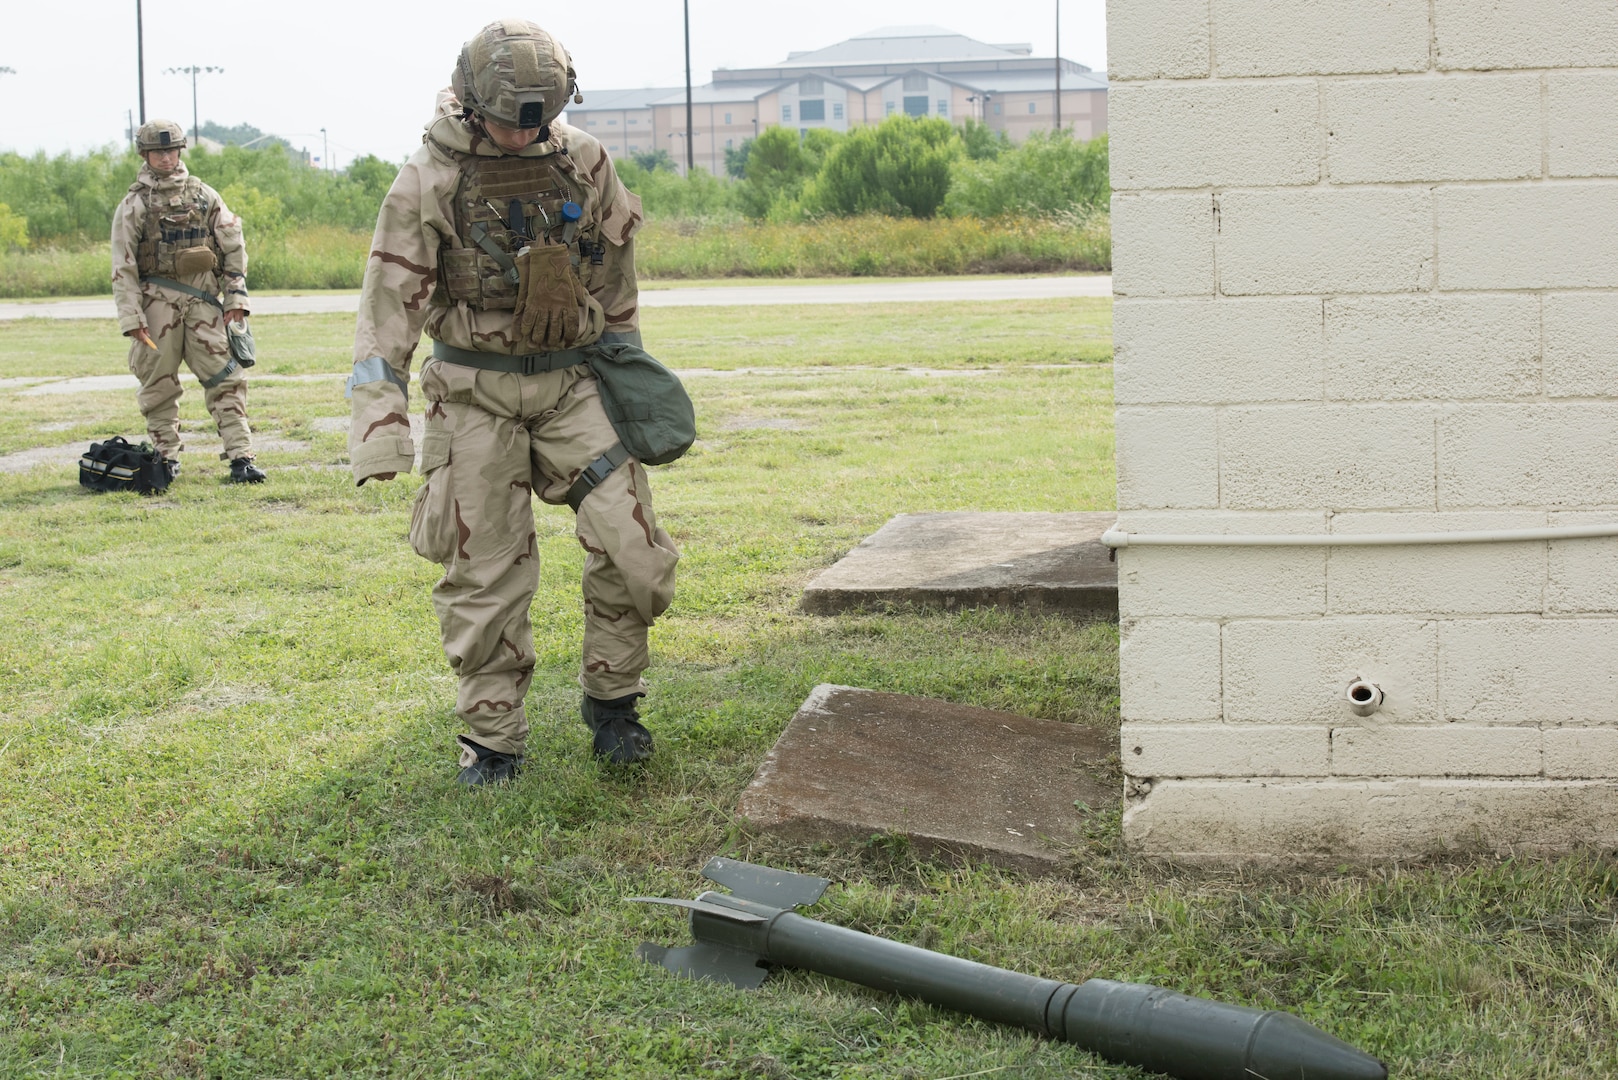 Staff Sgt. Brandon Foster and Staff Sgt. Eli Marquez, 902nd Civil Engineer Squadron Explosive Ordinance Disposal team leaders, practices disarming chemical munitions May 17, 2019, at Joint Base San Antonio-Lackland, Texas. EOD team members are Trained to detect, disarm, detonate and dispose of explosive threats.